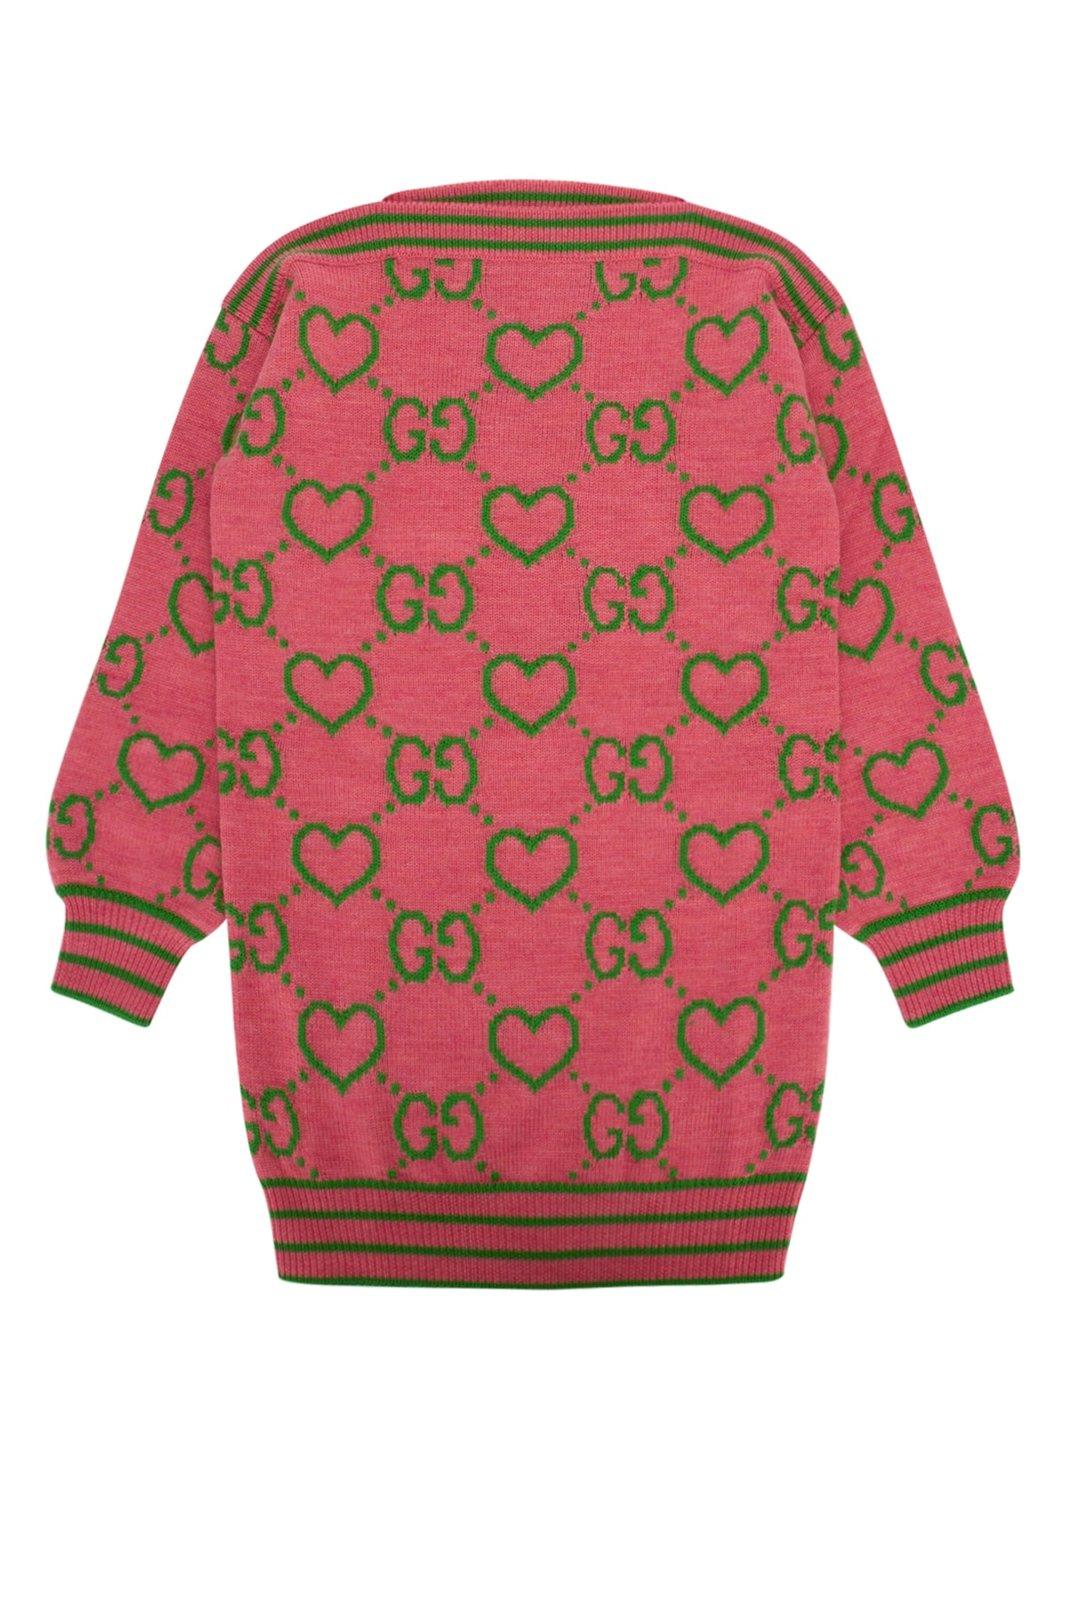 Gucci Logo Embroidered Long-sleeved Dress